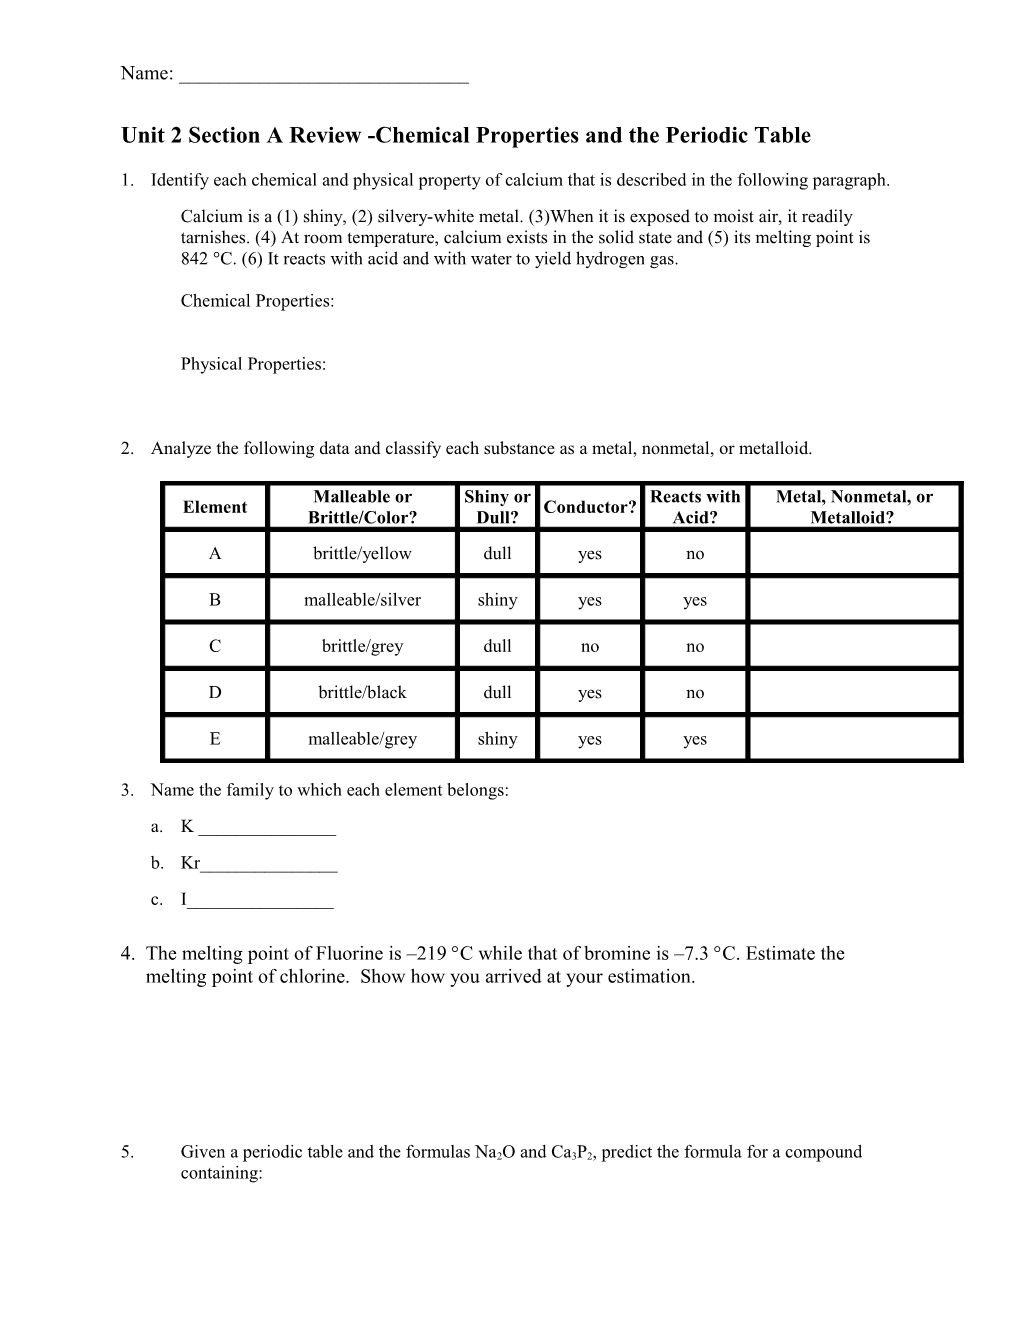 Unit 2 Section a Review -Chemical Properties and the Periodic Table